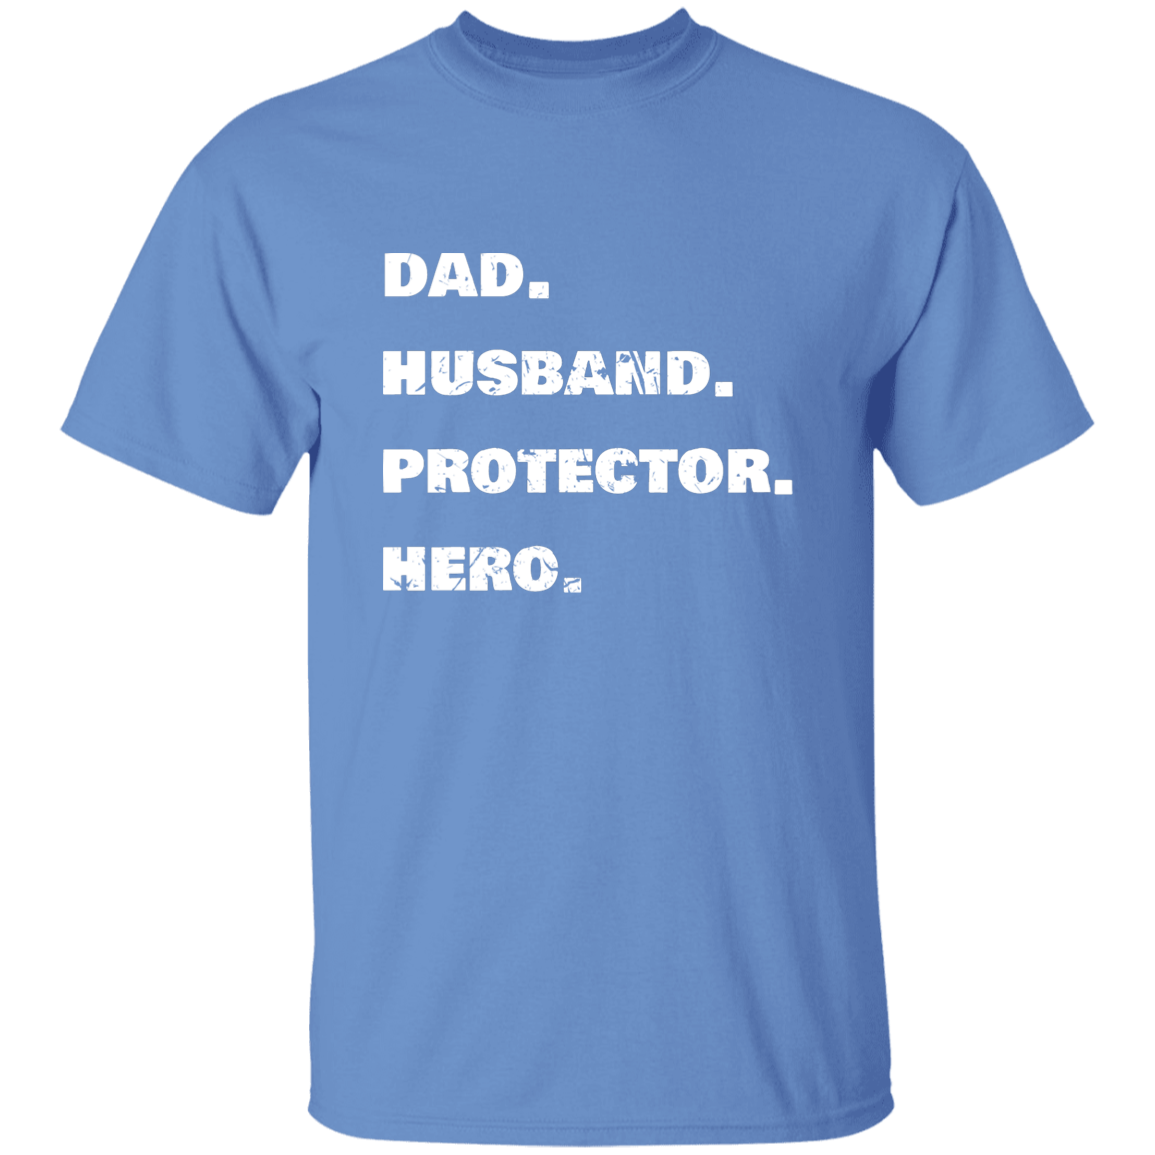 Dad. Husband. Protector. Hero. | Men's Premium T-Shirt | Perfect Gift for Dad and Husband